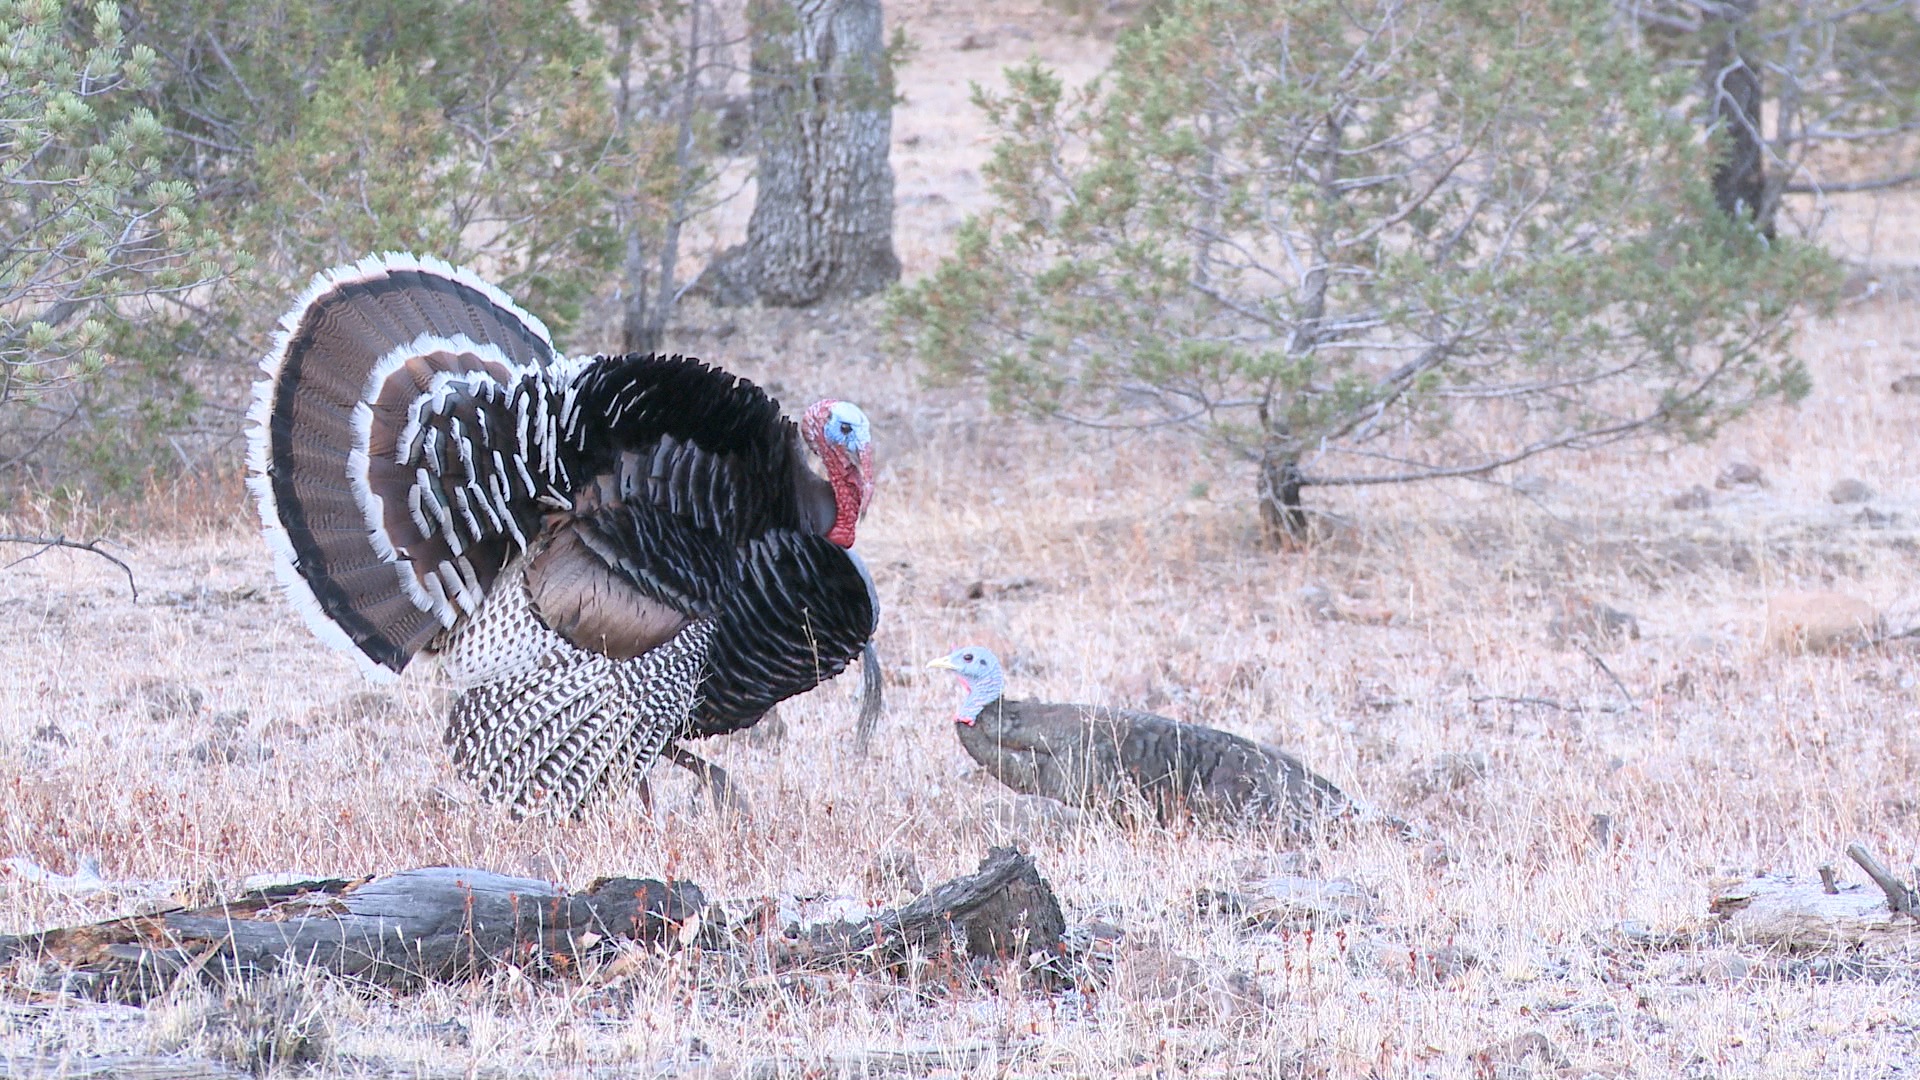 Turkey Hunting Wallpaper Image Gallery For